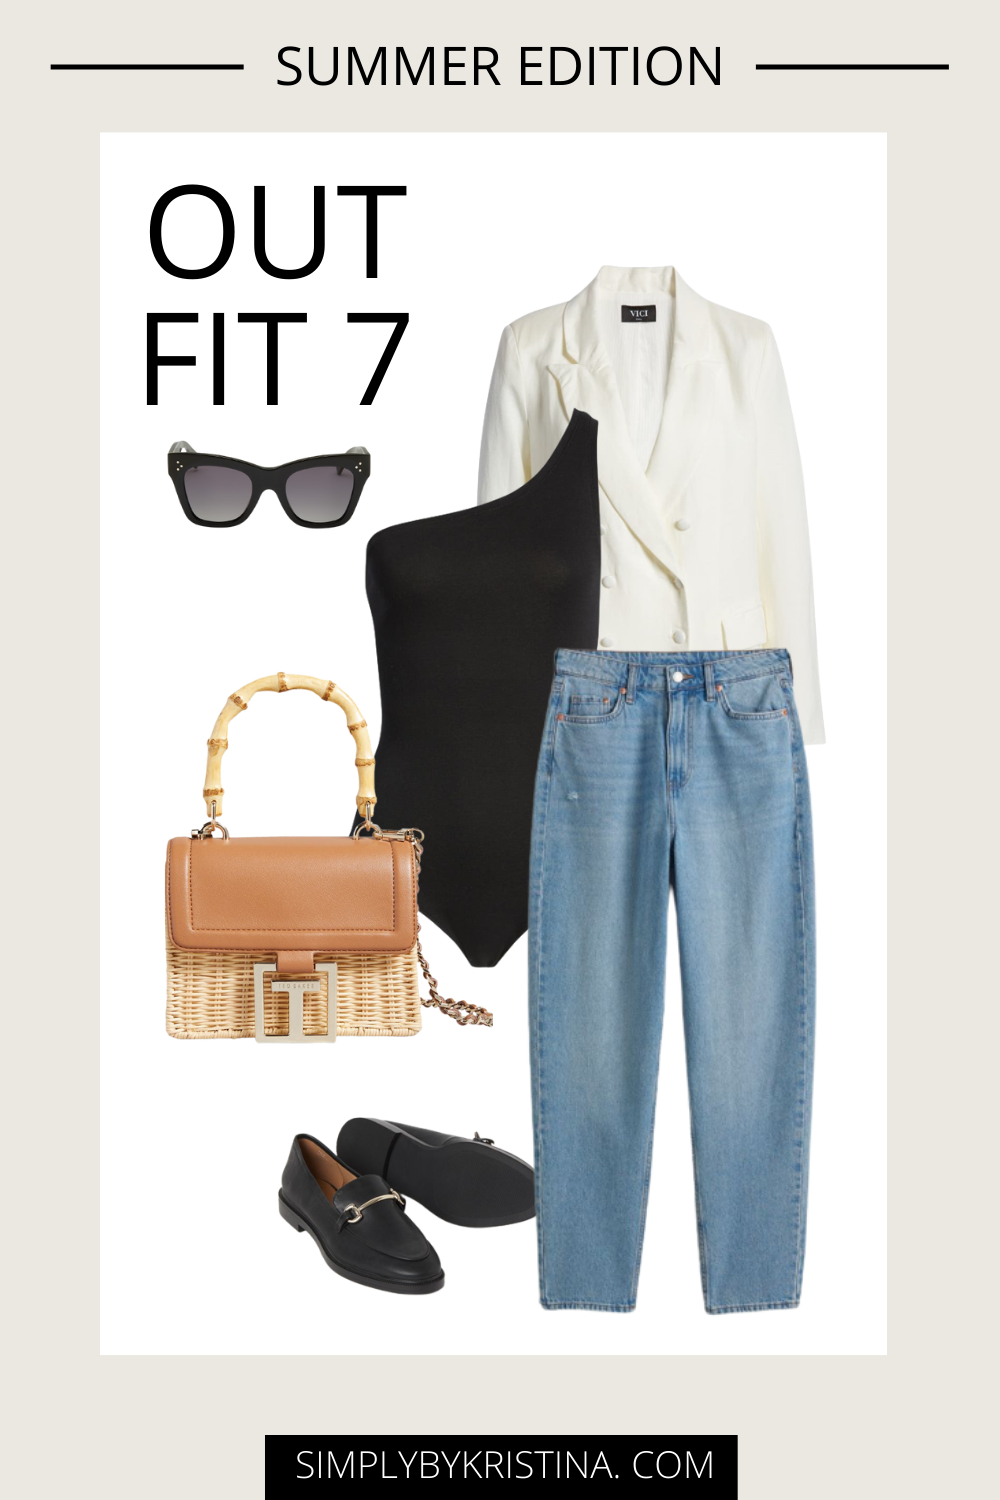 Key Staples For A Capsule Wardrobe: Summer Edition